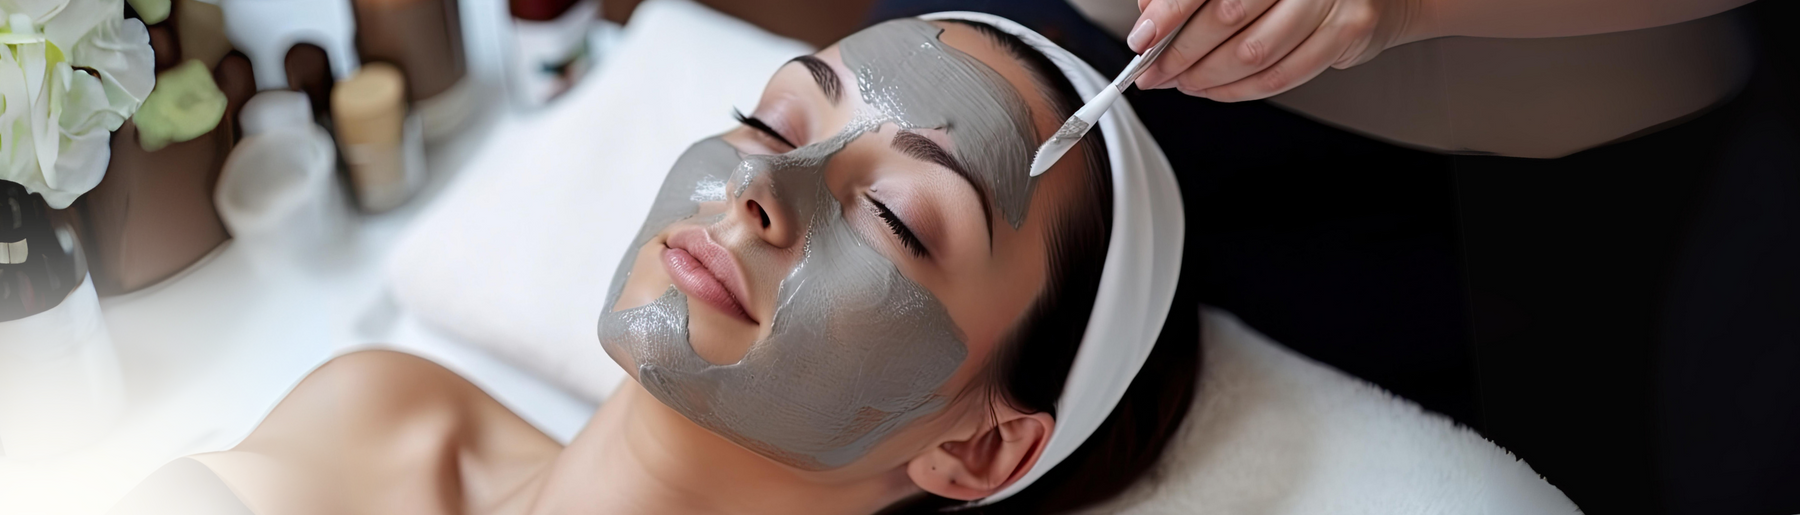 What are the benefits of clay and mud facial masks?